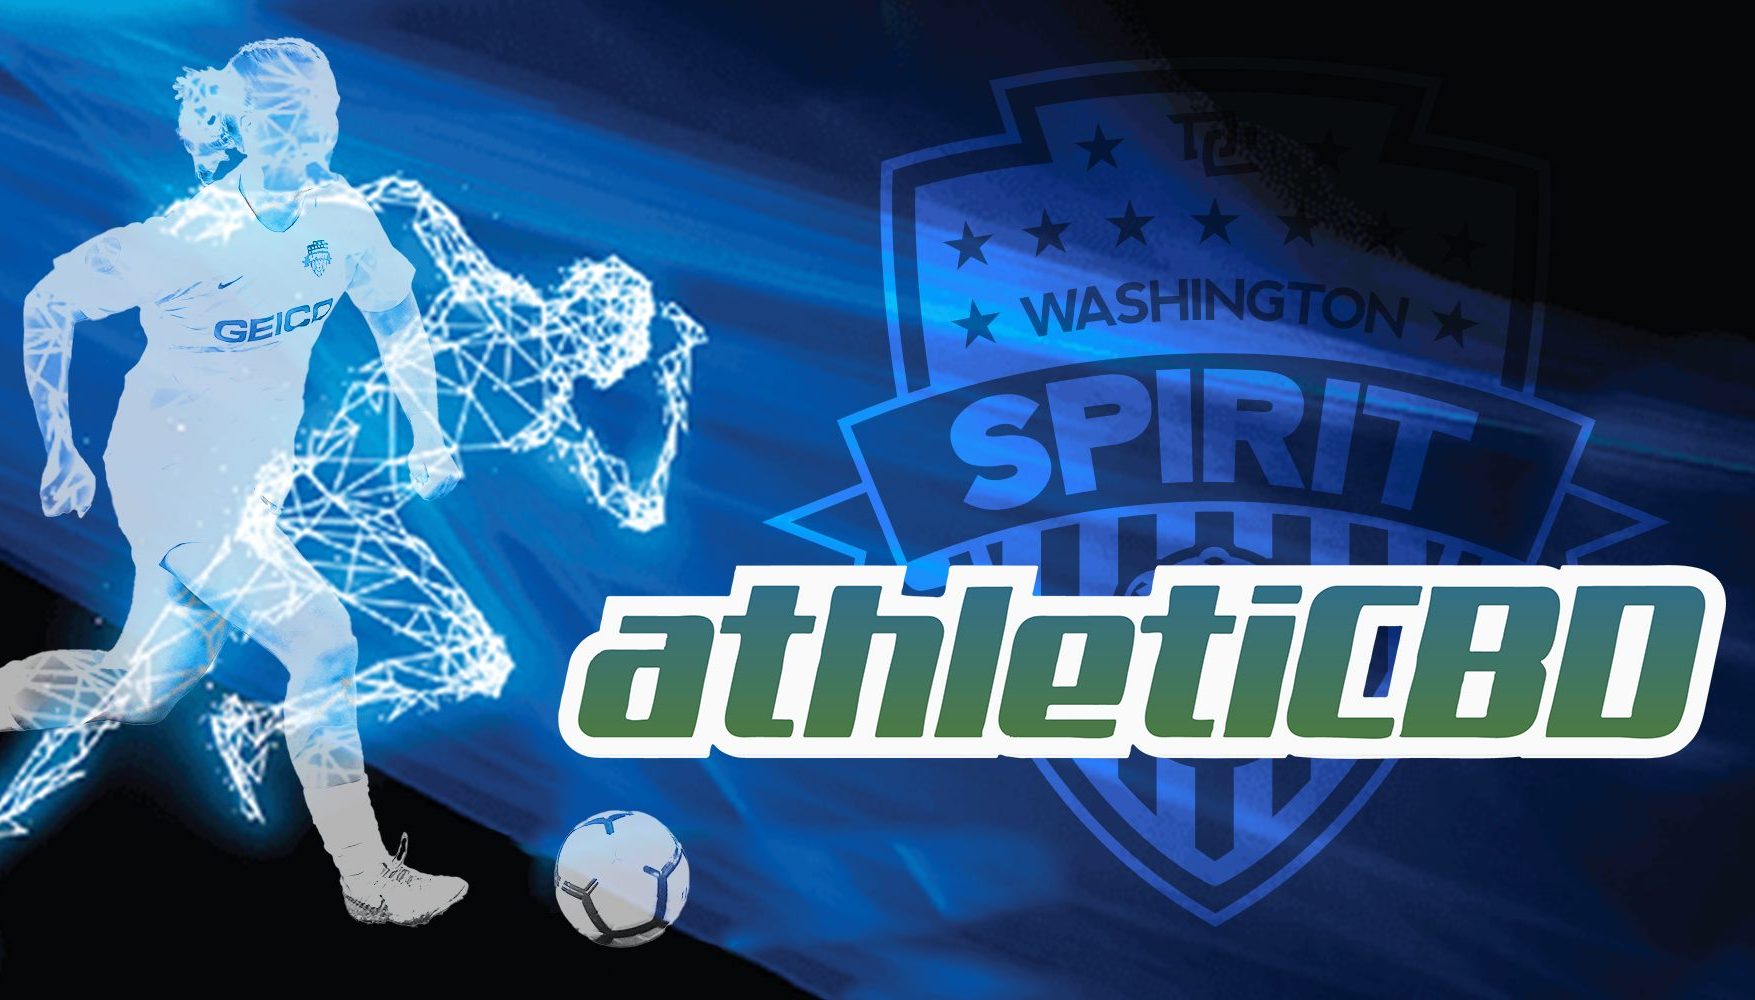 Washington Spirit announce sponsorship deal with AthletiCBD Featured Image